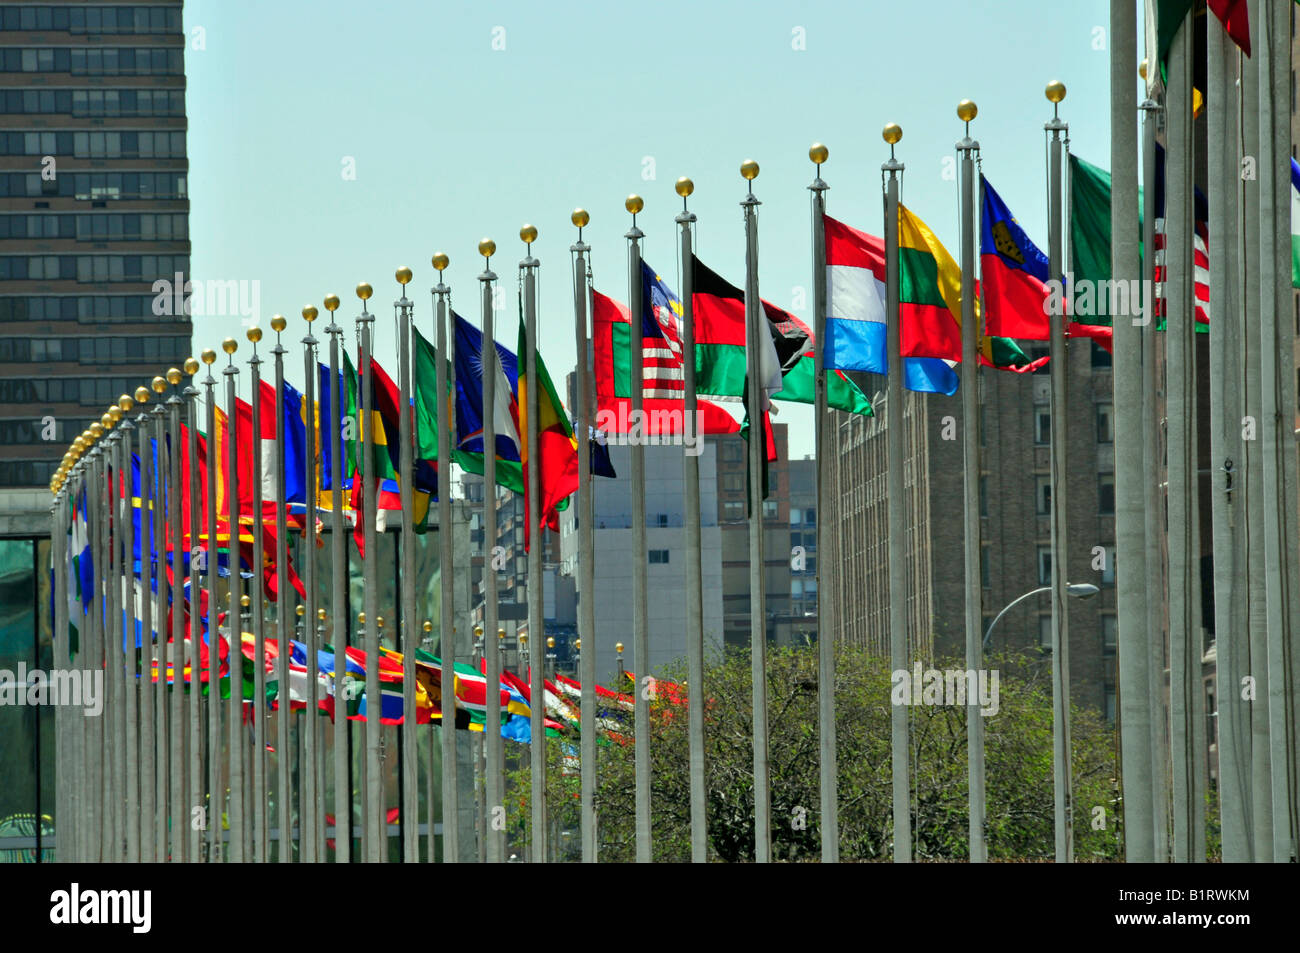 United Nations Flags Images